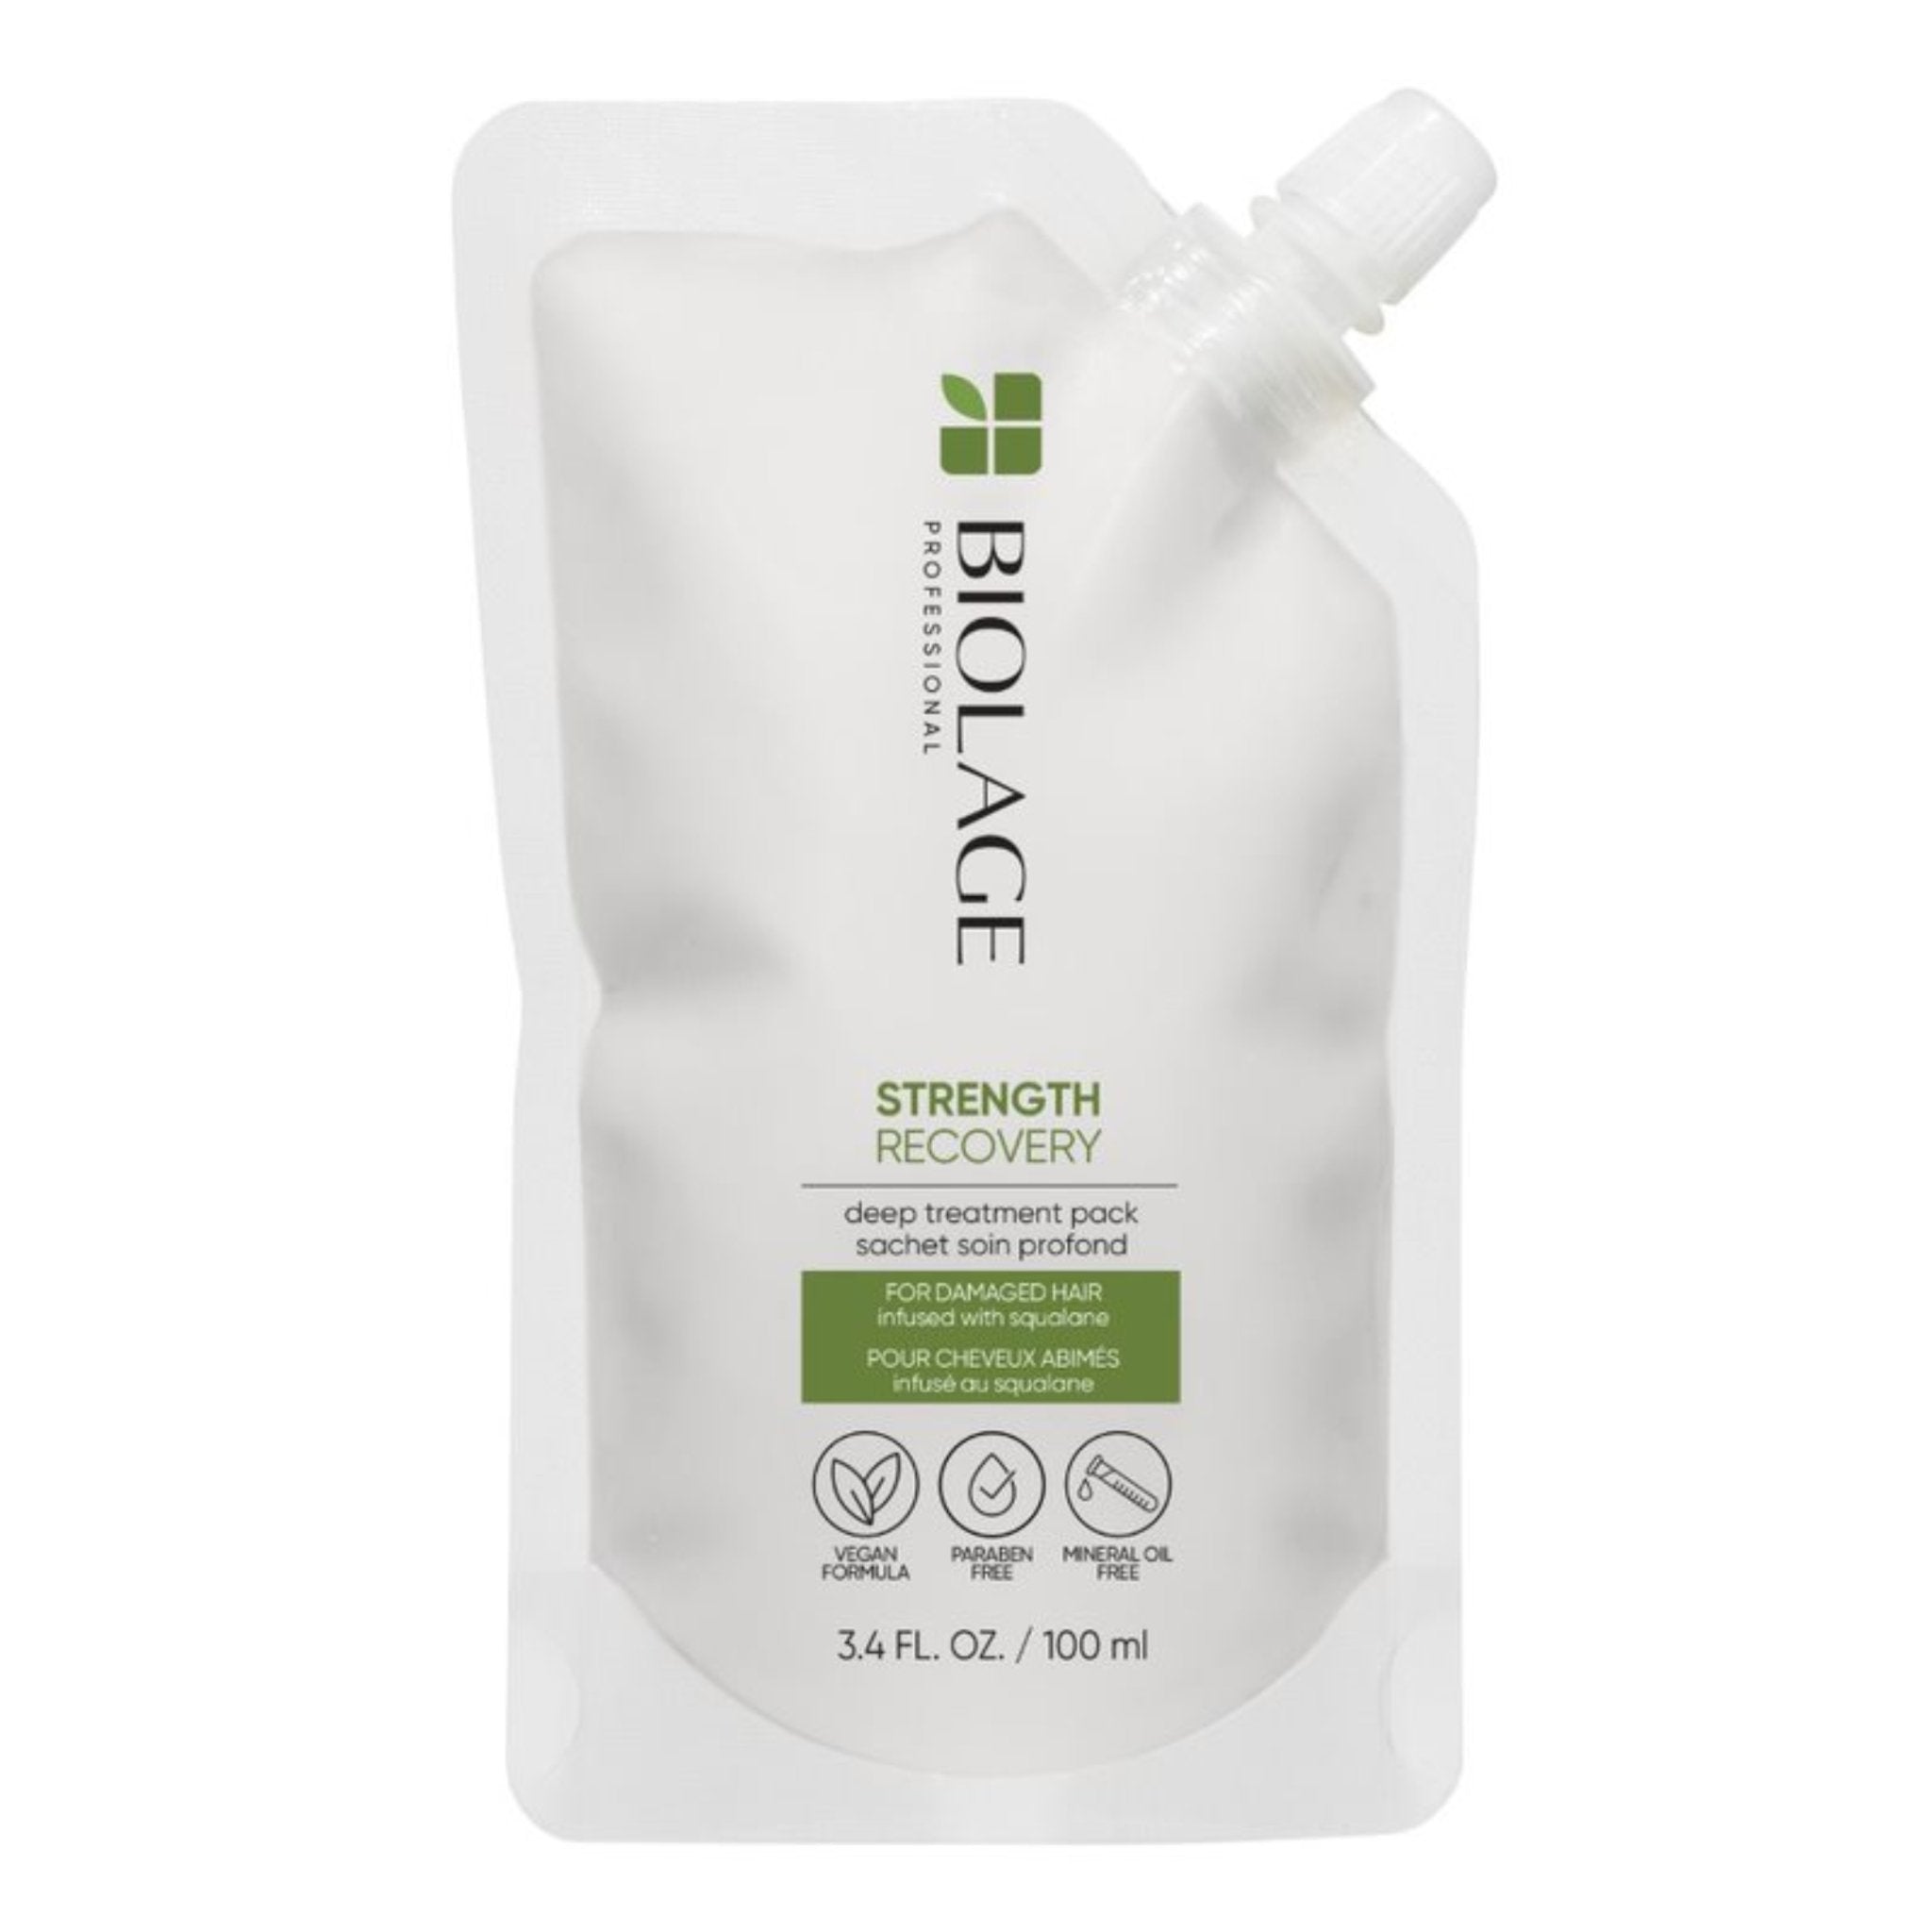 Biolage. Sachet soin profond Strenght Recovery - 100 ml - Concept C. Shop